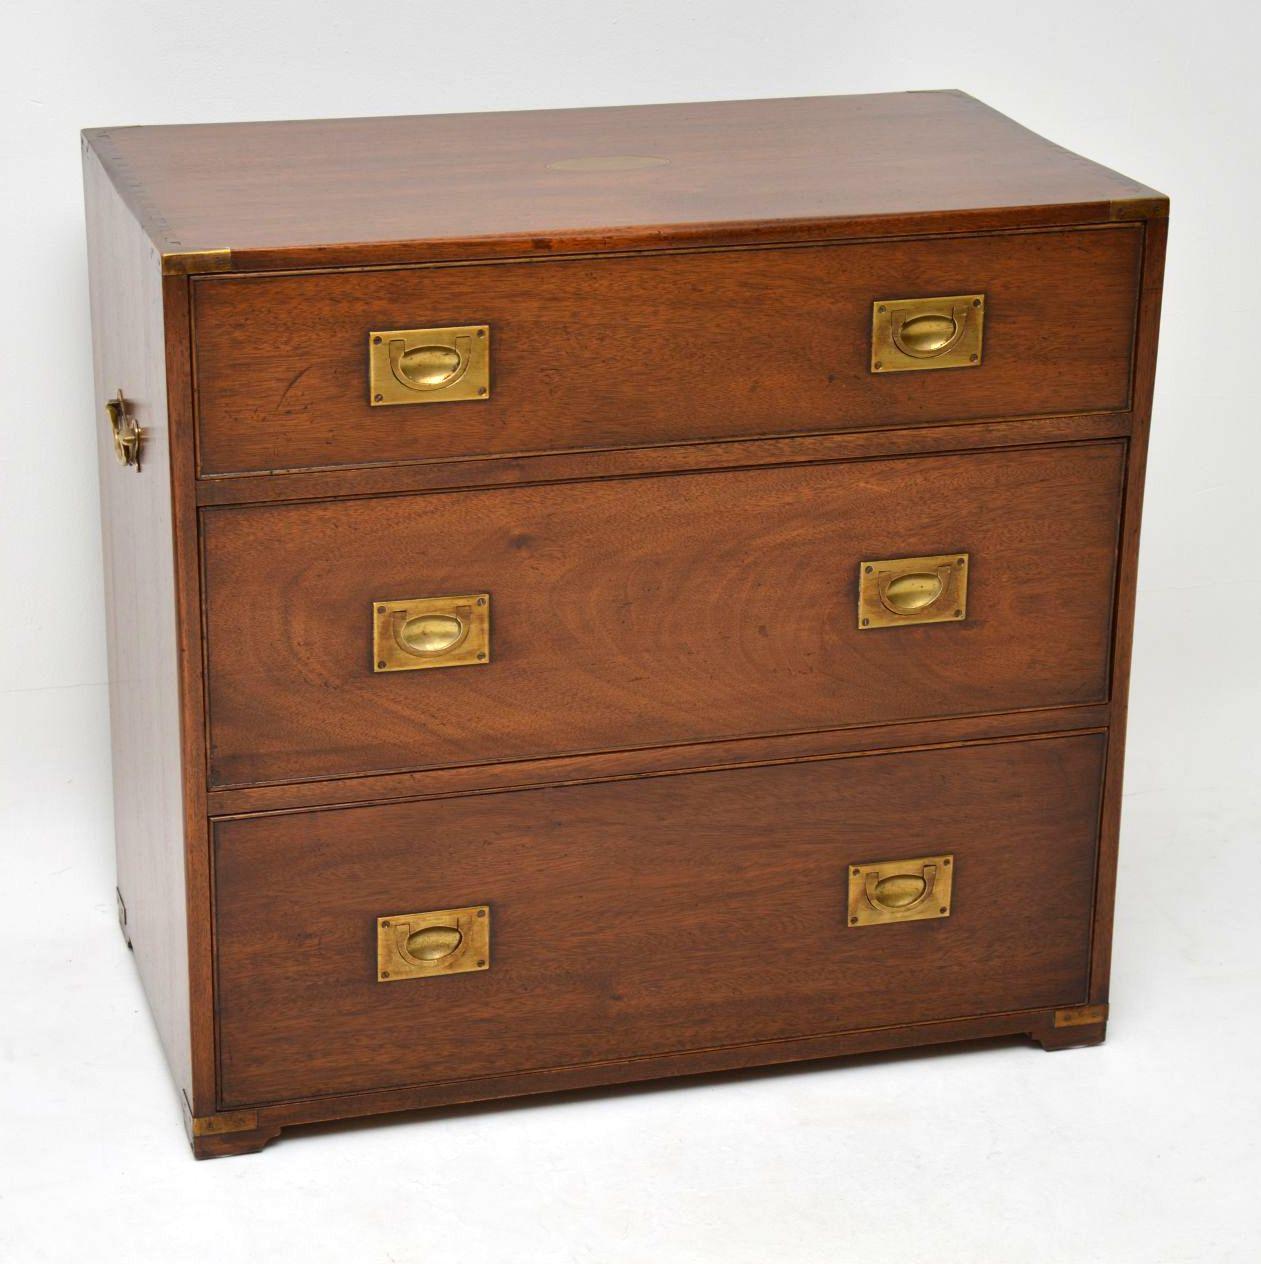 This mahogany campaign style chest of drawers is a great looking piece of furniture and good quality too. It has a brass inset oval plaque on the top, brass corner edges, inset brass military handles & brass side handles. The drawers are deep and